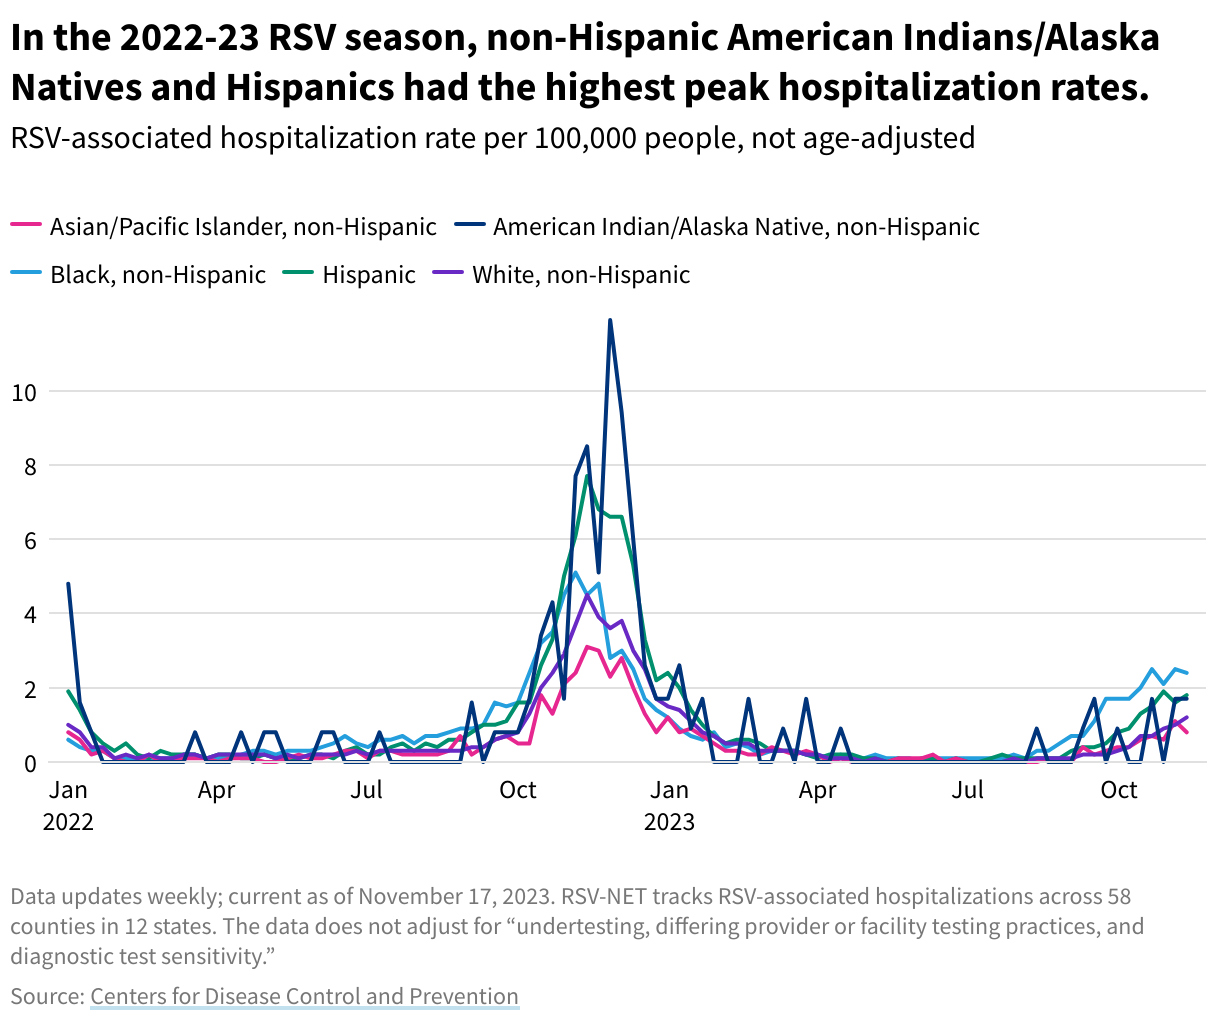 A line chart showing RSV-associated hospitalization rate per 100,000 people by race, not age-adjusted. In the 2022–23 season, non-Hispanic American Indians/Alaska Natives and Hispanics had the highest peak rates.